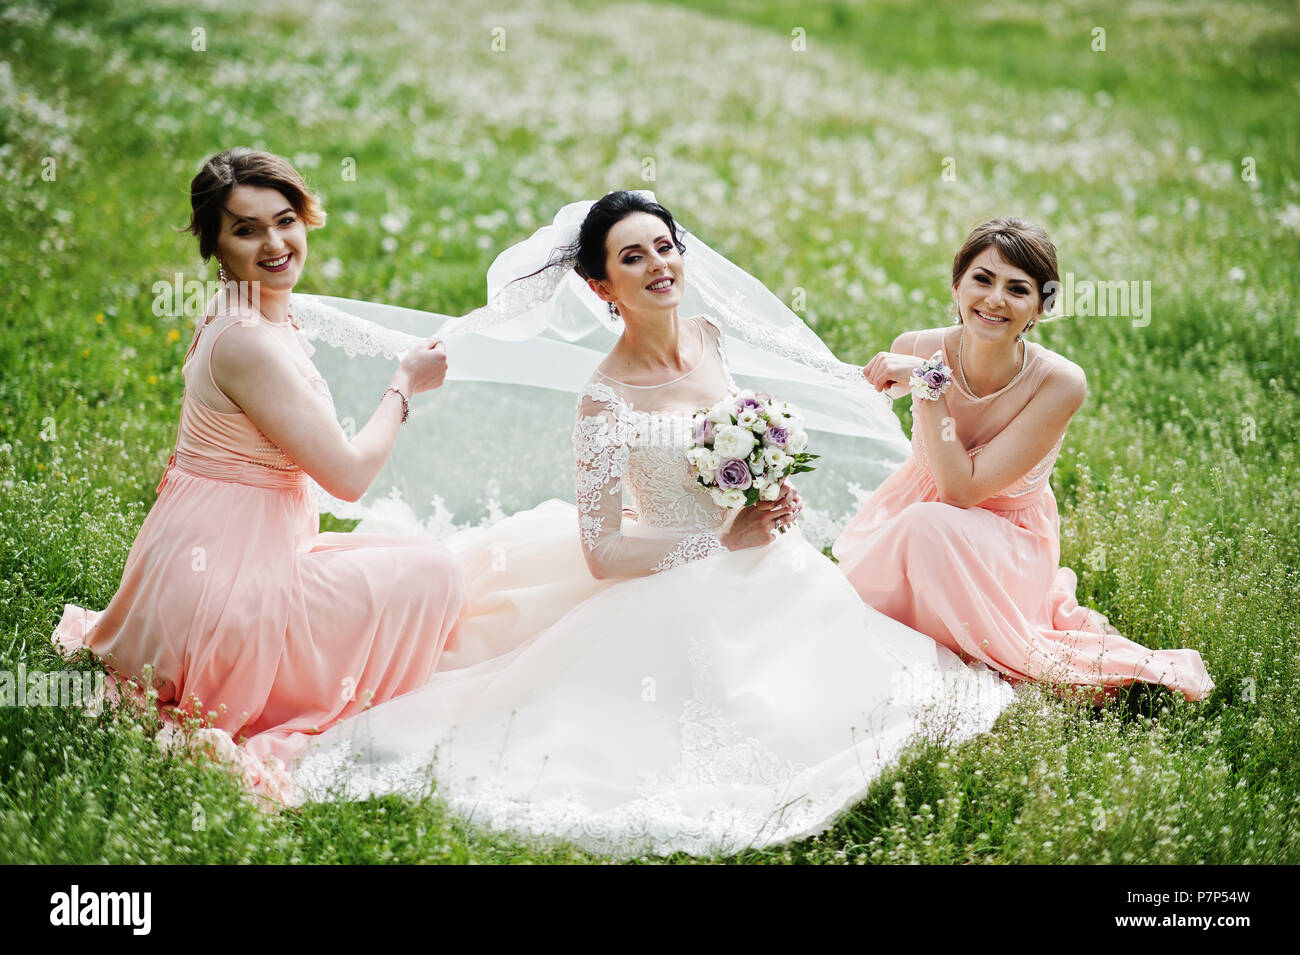 beautiful bride sitting and posing with bridesmaids on the field full of flowers on the wedding day P7P54W